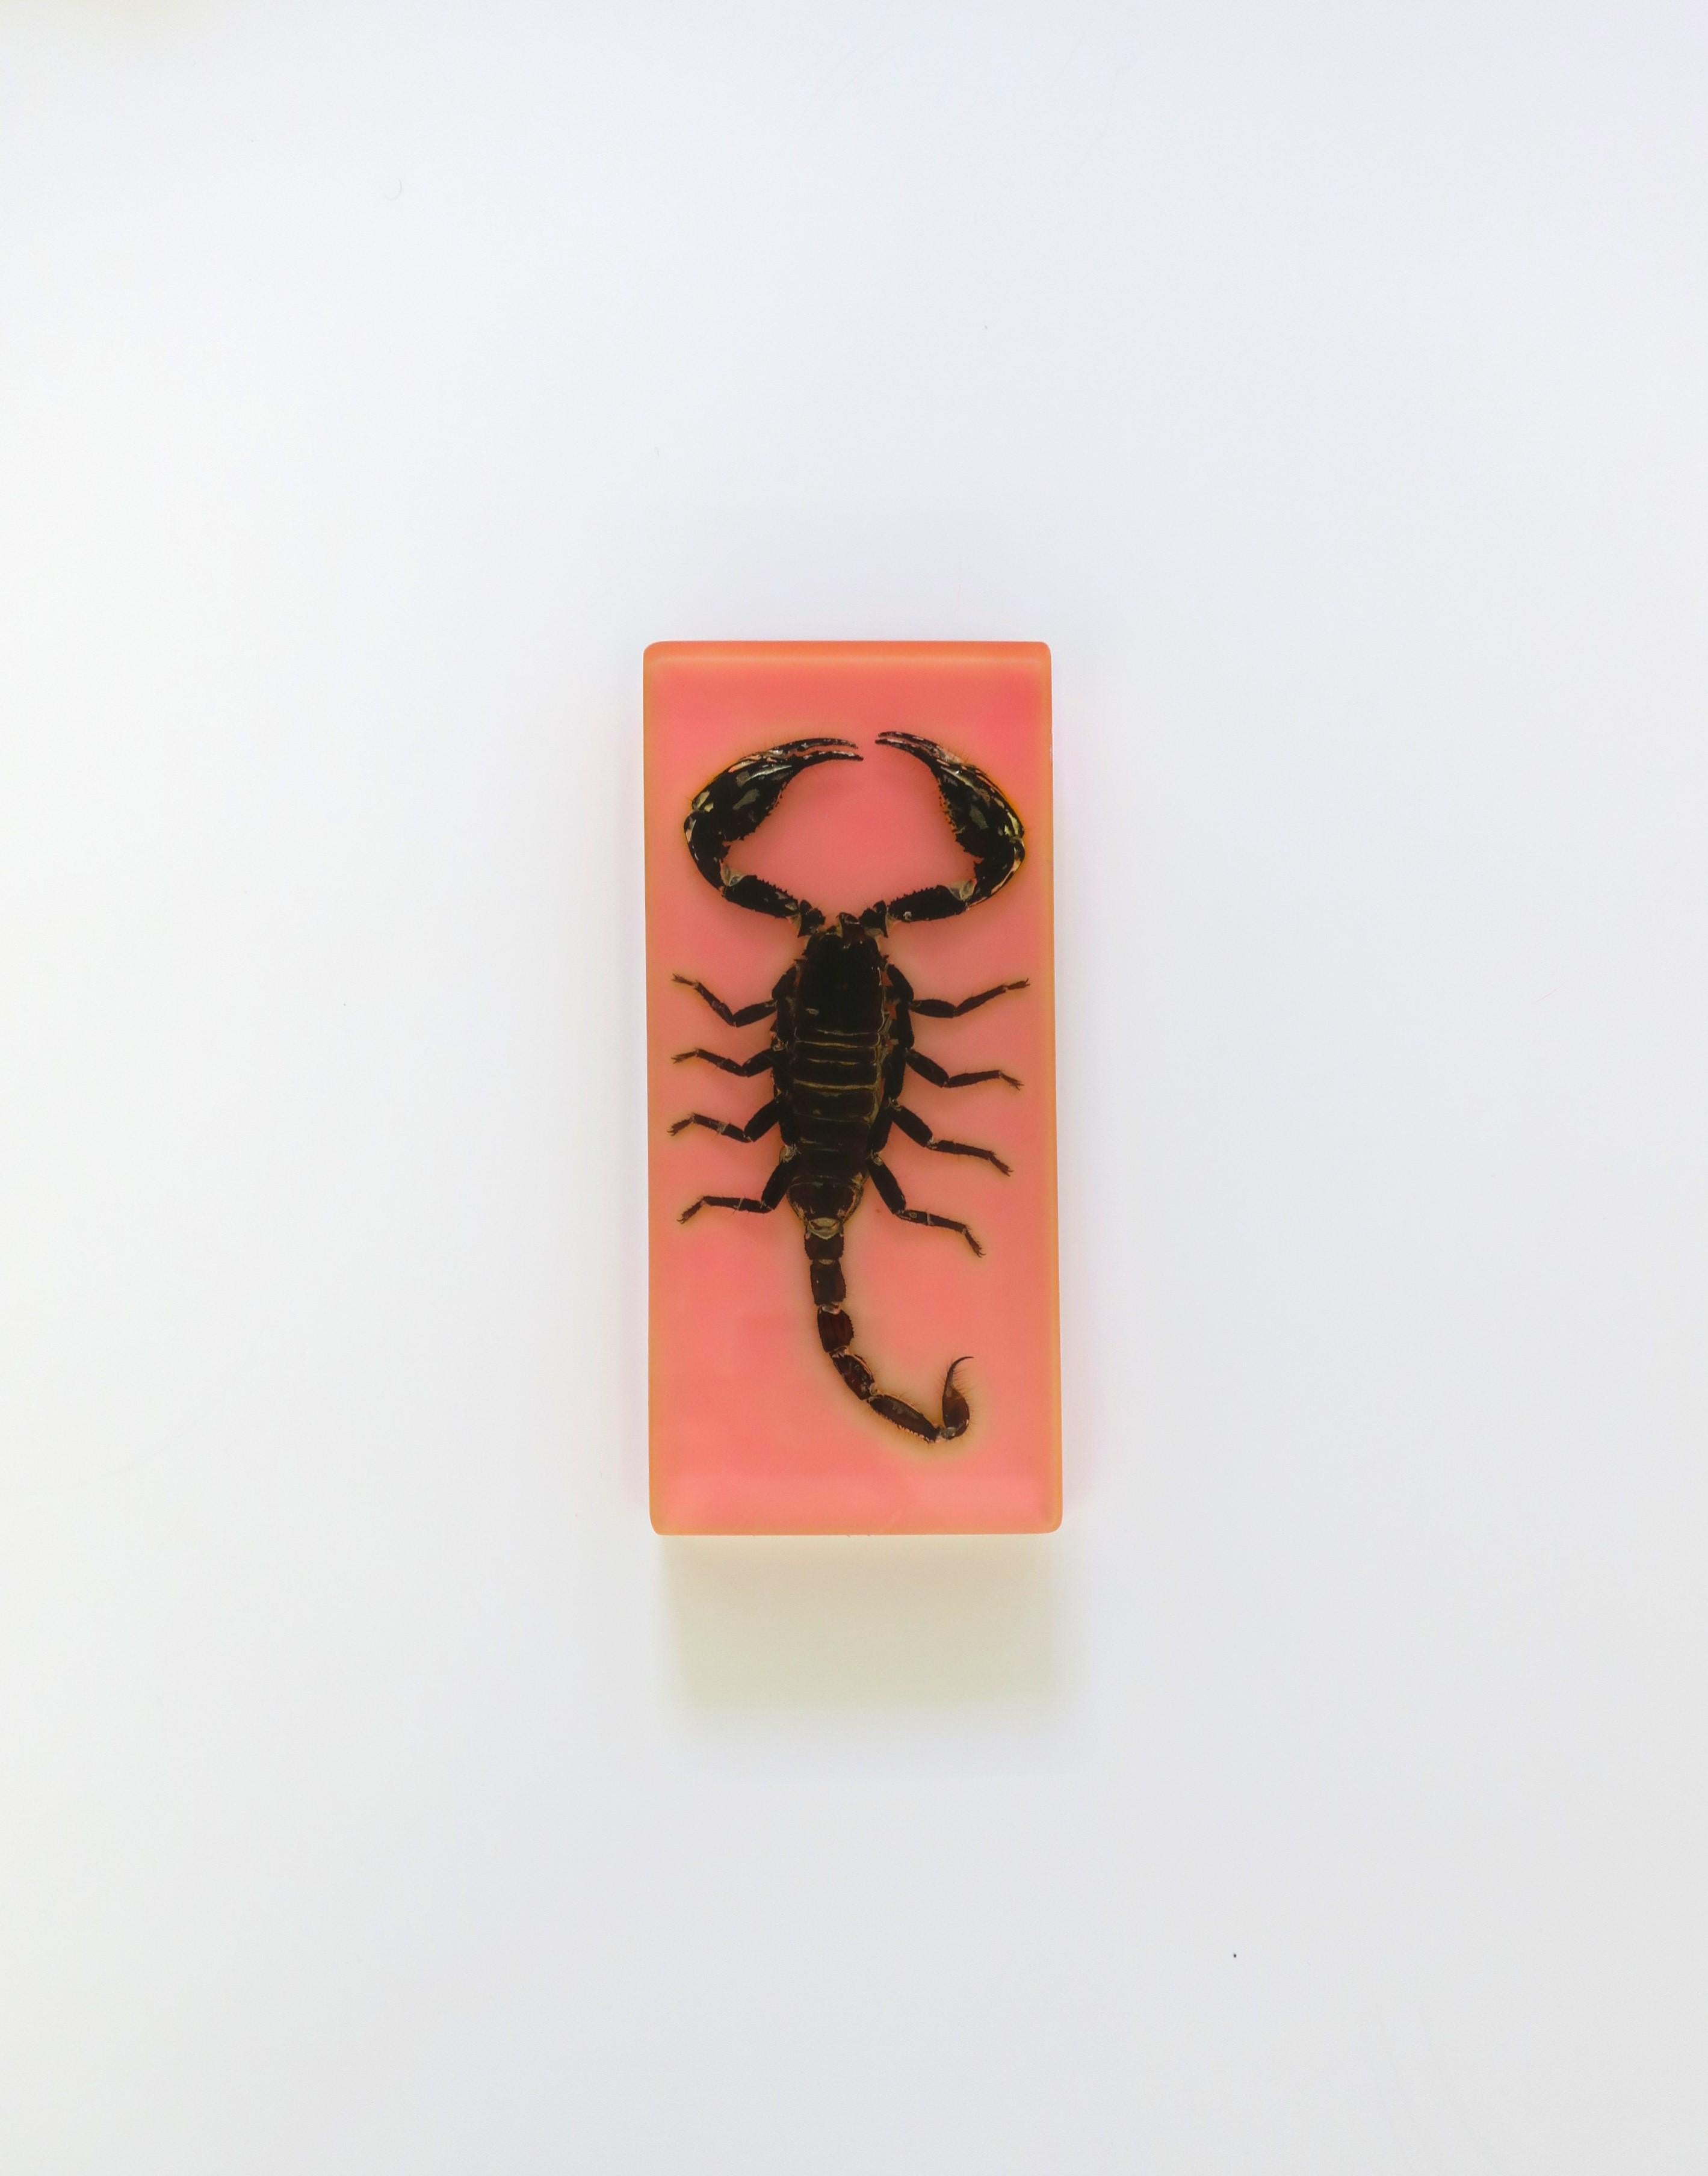 A real scorpion encased in pink acrylic Lucite with white acrylic base, circa late-20th century, 1970s. A great decorative object for a desk, library, etc. 

Dimensions: 3.07